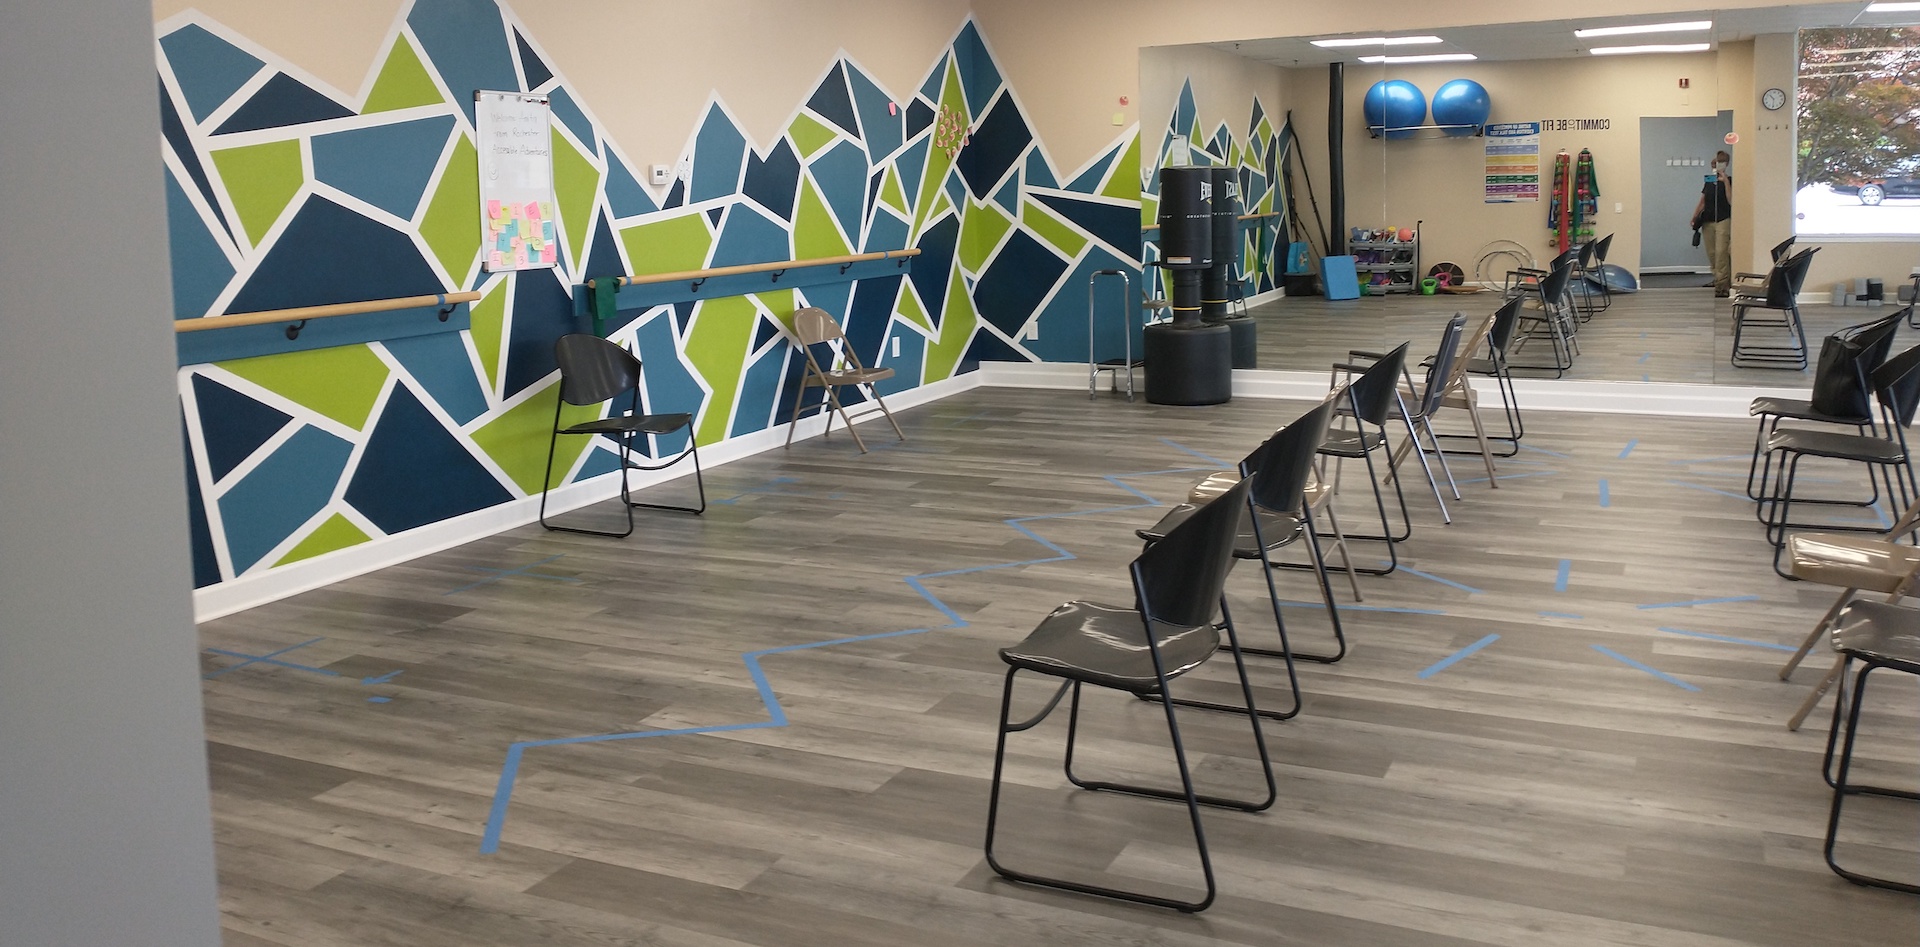 A spacious therapy gym has an artistic cubicle artwork on the wall, two rows of chairs face that wall; a floor-to-ceiling mirro extends along the side wall, showing therapy balls and equipment on the other wall. Taped paths on the floor indicated placement for various physical therapy exercises.